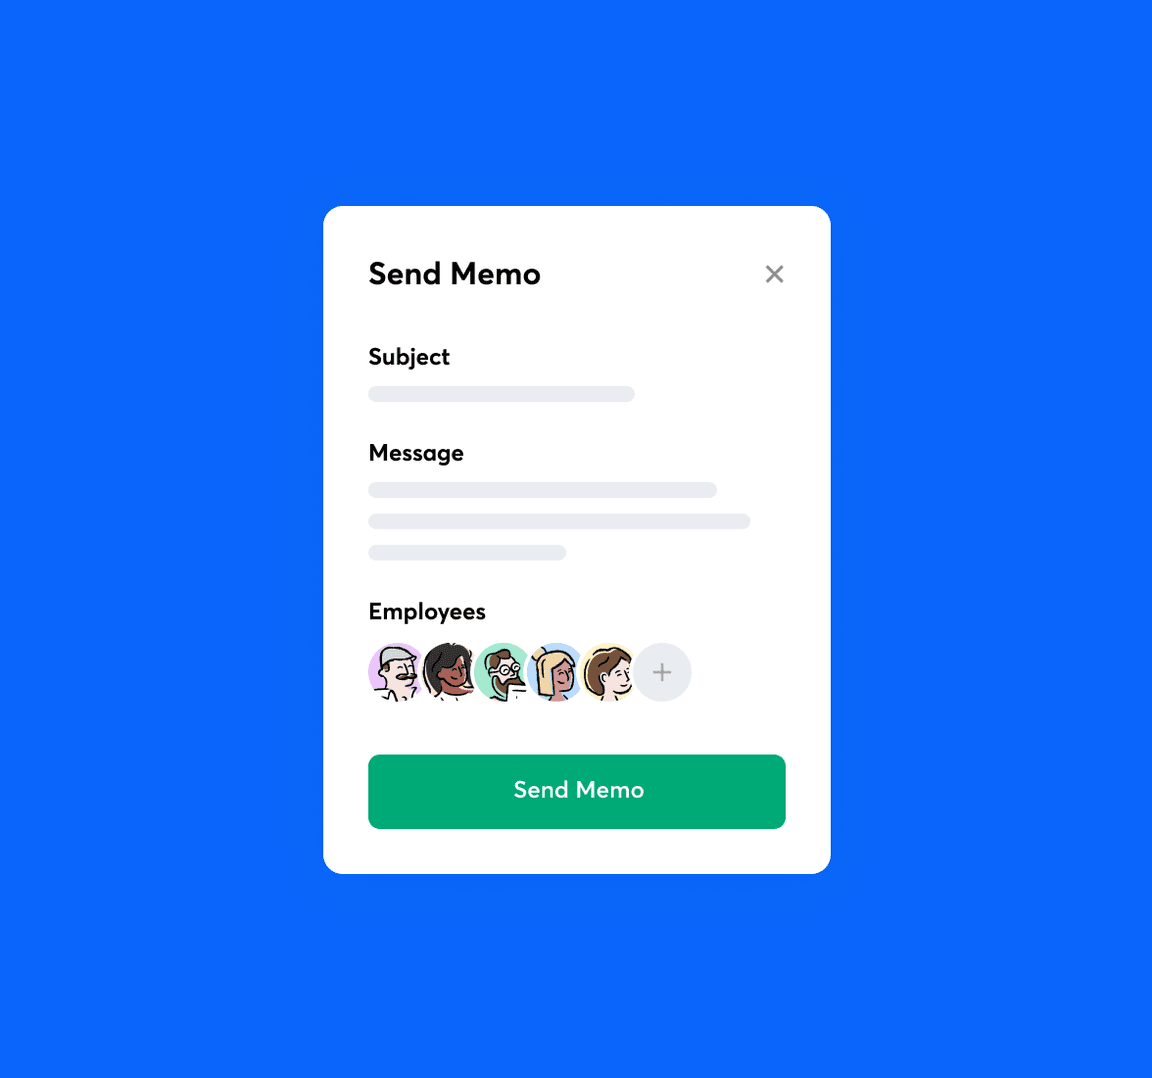 A memo creation screen in RotaCloud containing subject line, message box, recipients, and green Send Memo button.